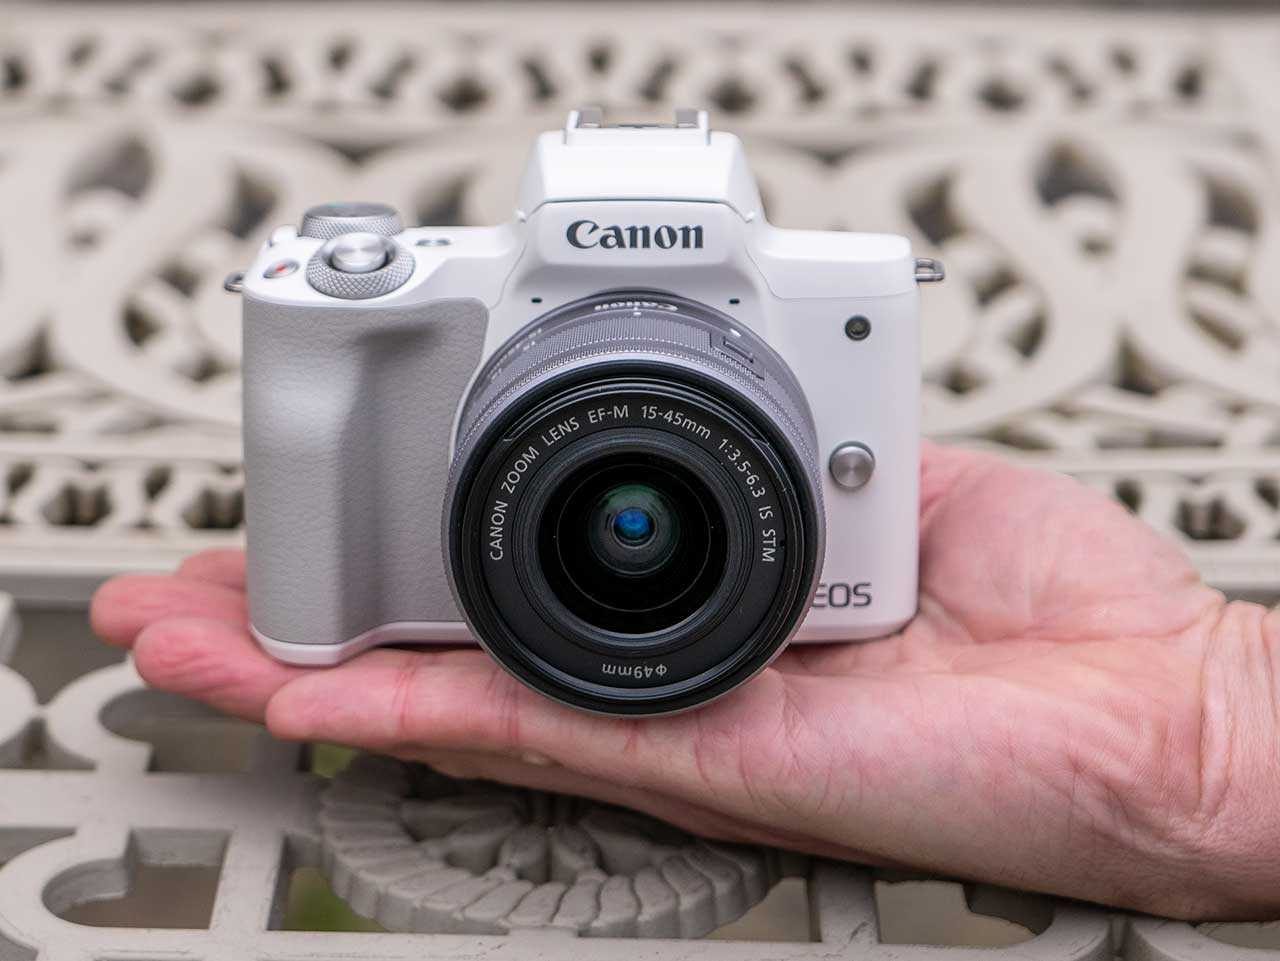 Canon Eos M50 Mark Ii Review | Photography Blog